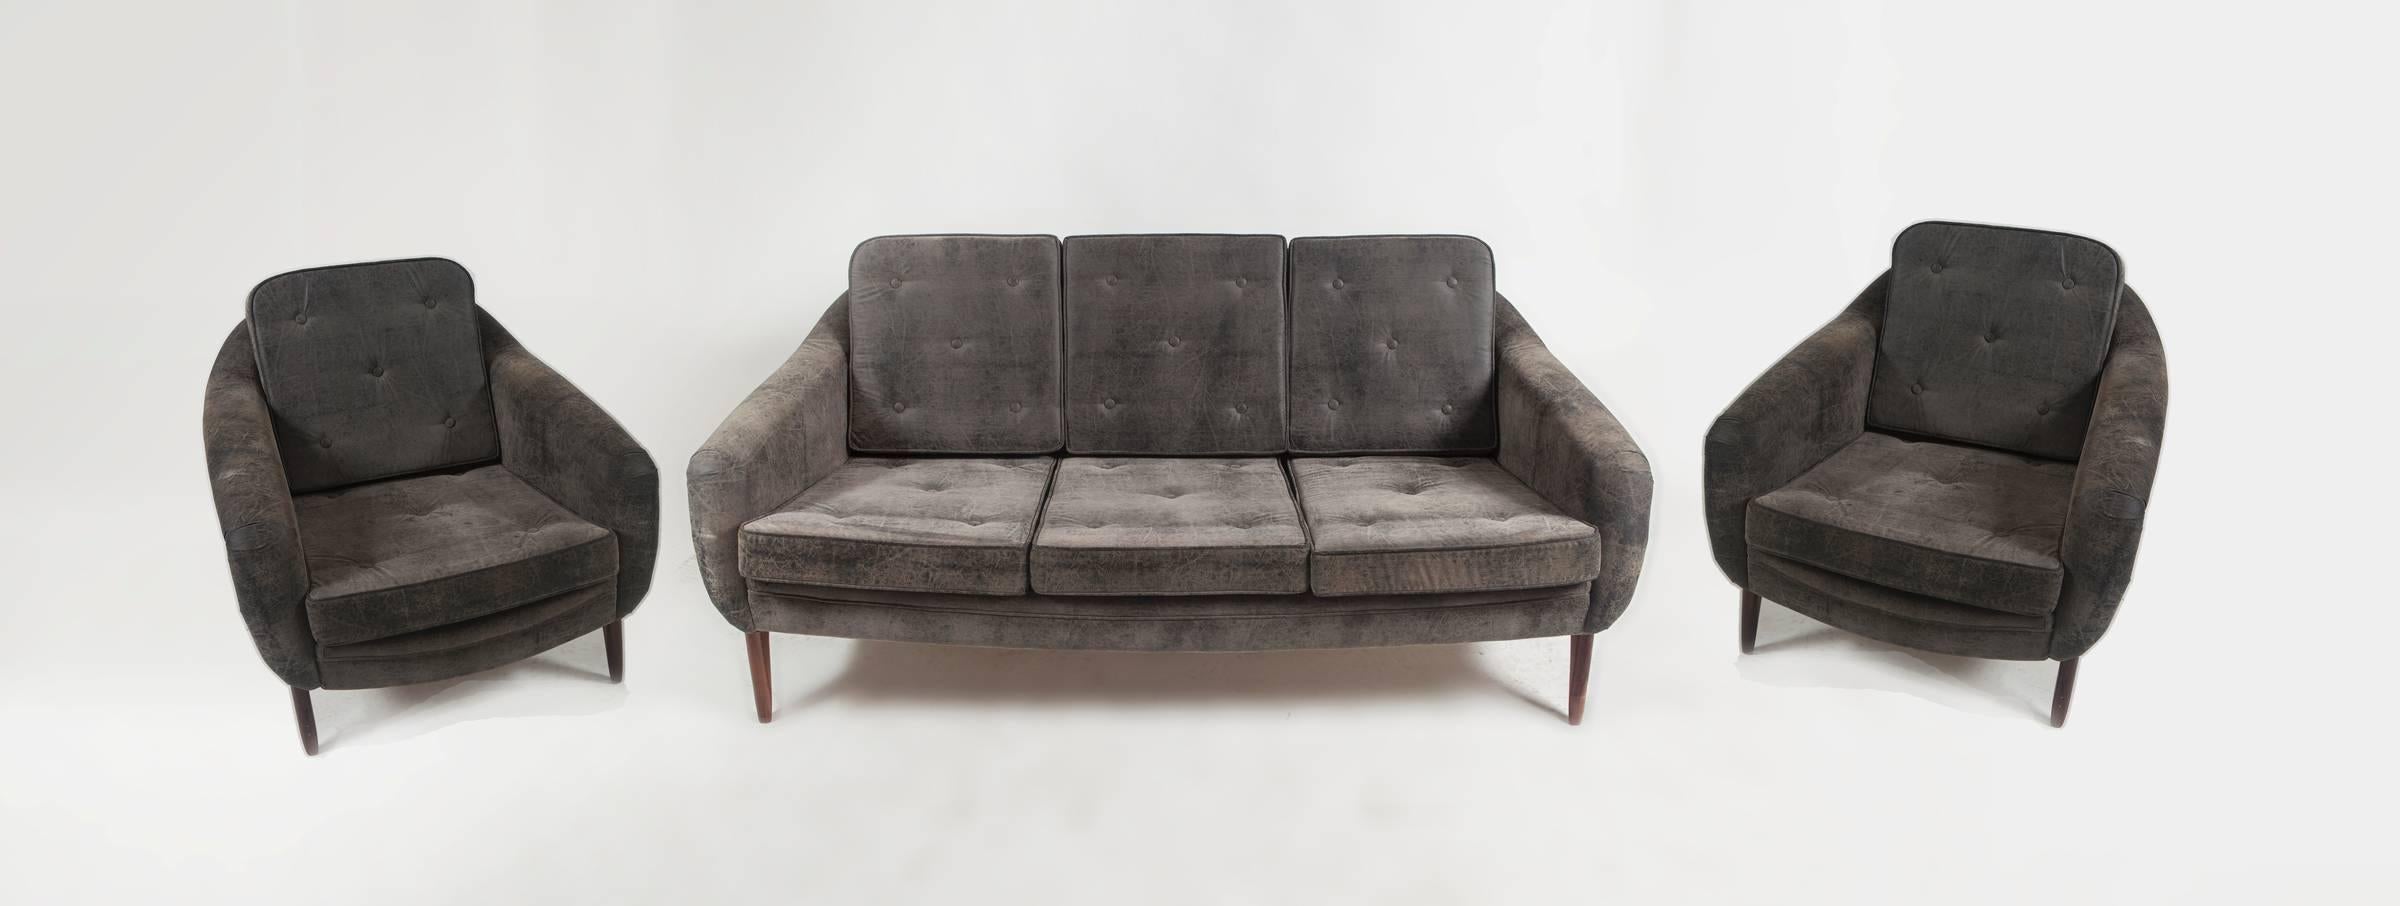 Lounge Set by Sergio Rodrigues. Includes one couch and two armchairs.
Legs in solid jacaranda, seat and back upholstered. 
The armchairs has 0.33 x 0.38 x 0.30 inches, the couch has 0.69 x 0.38 x 0.30 inch.
Brazil, 1958

 